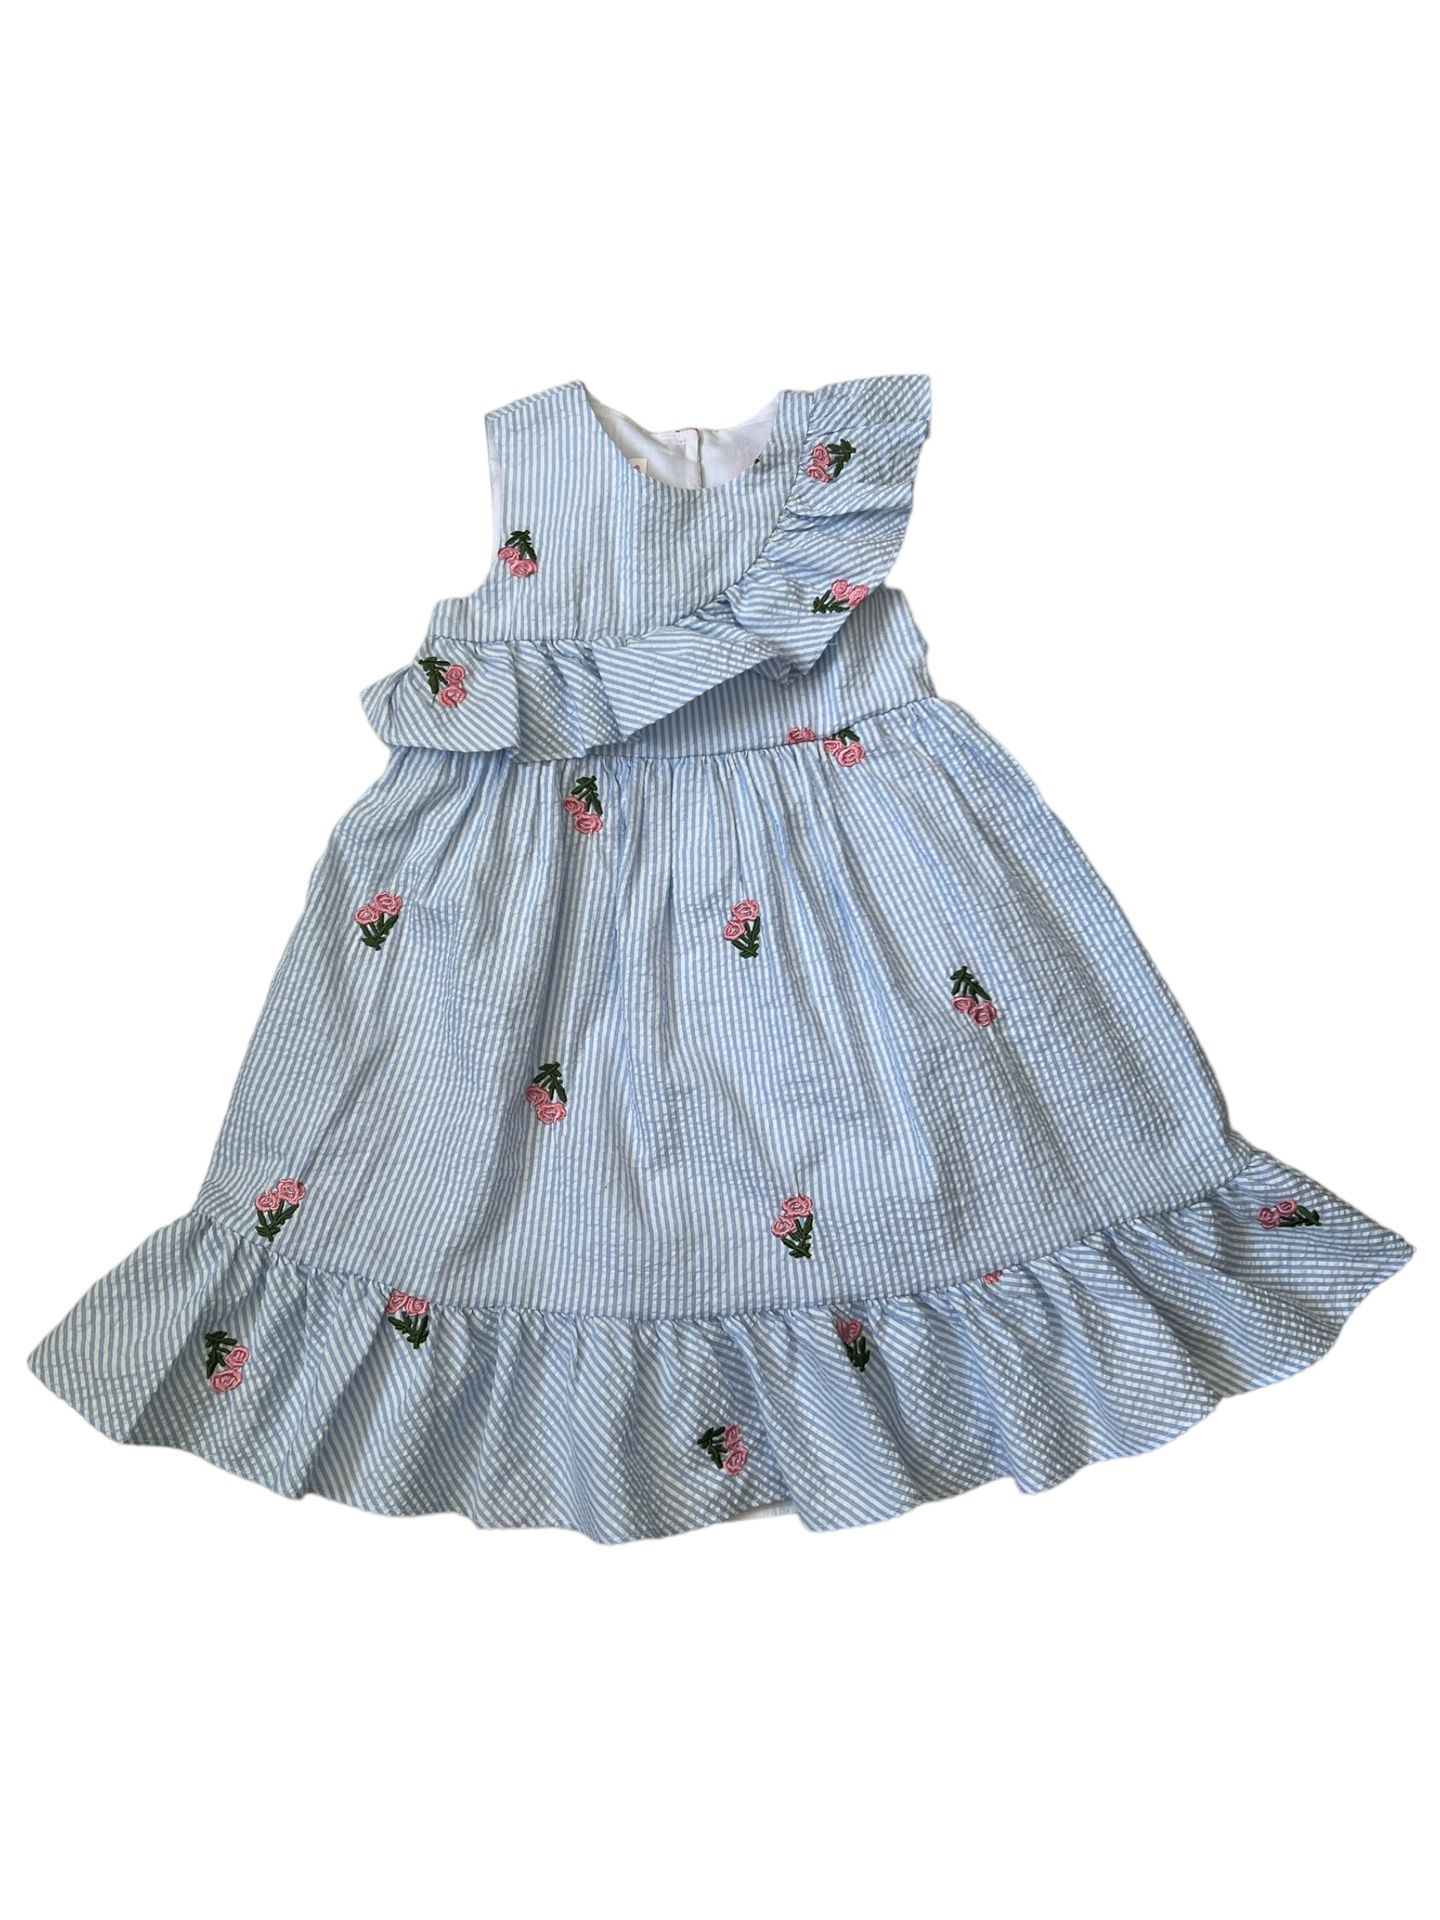 Bonnie Jean flower Easter dress size 5 lining flare spring embroidery blue pink. Embroidered flowers and lined with ruffle bottom Dress in excellent c